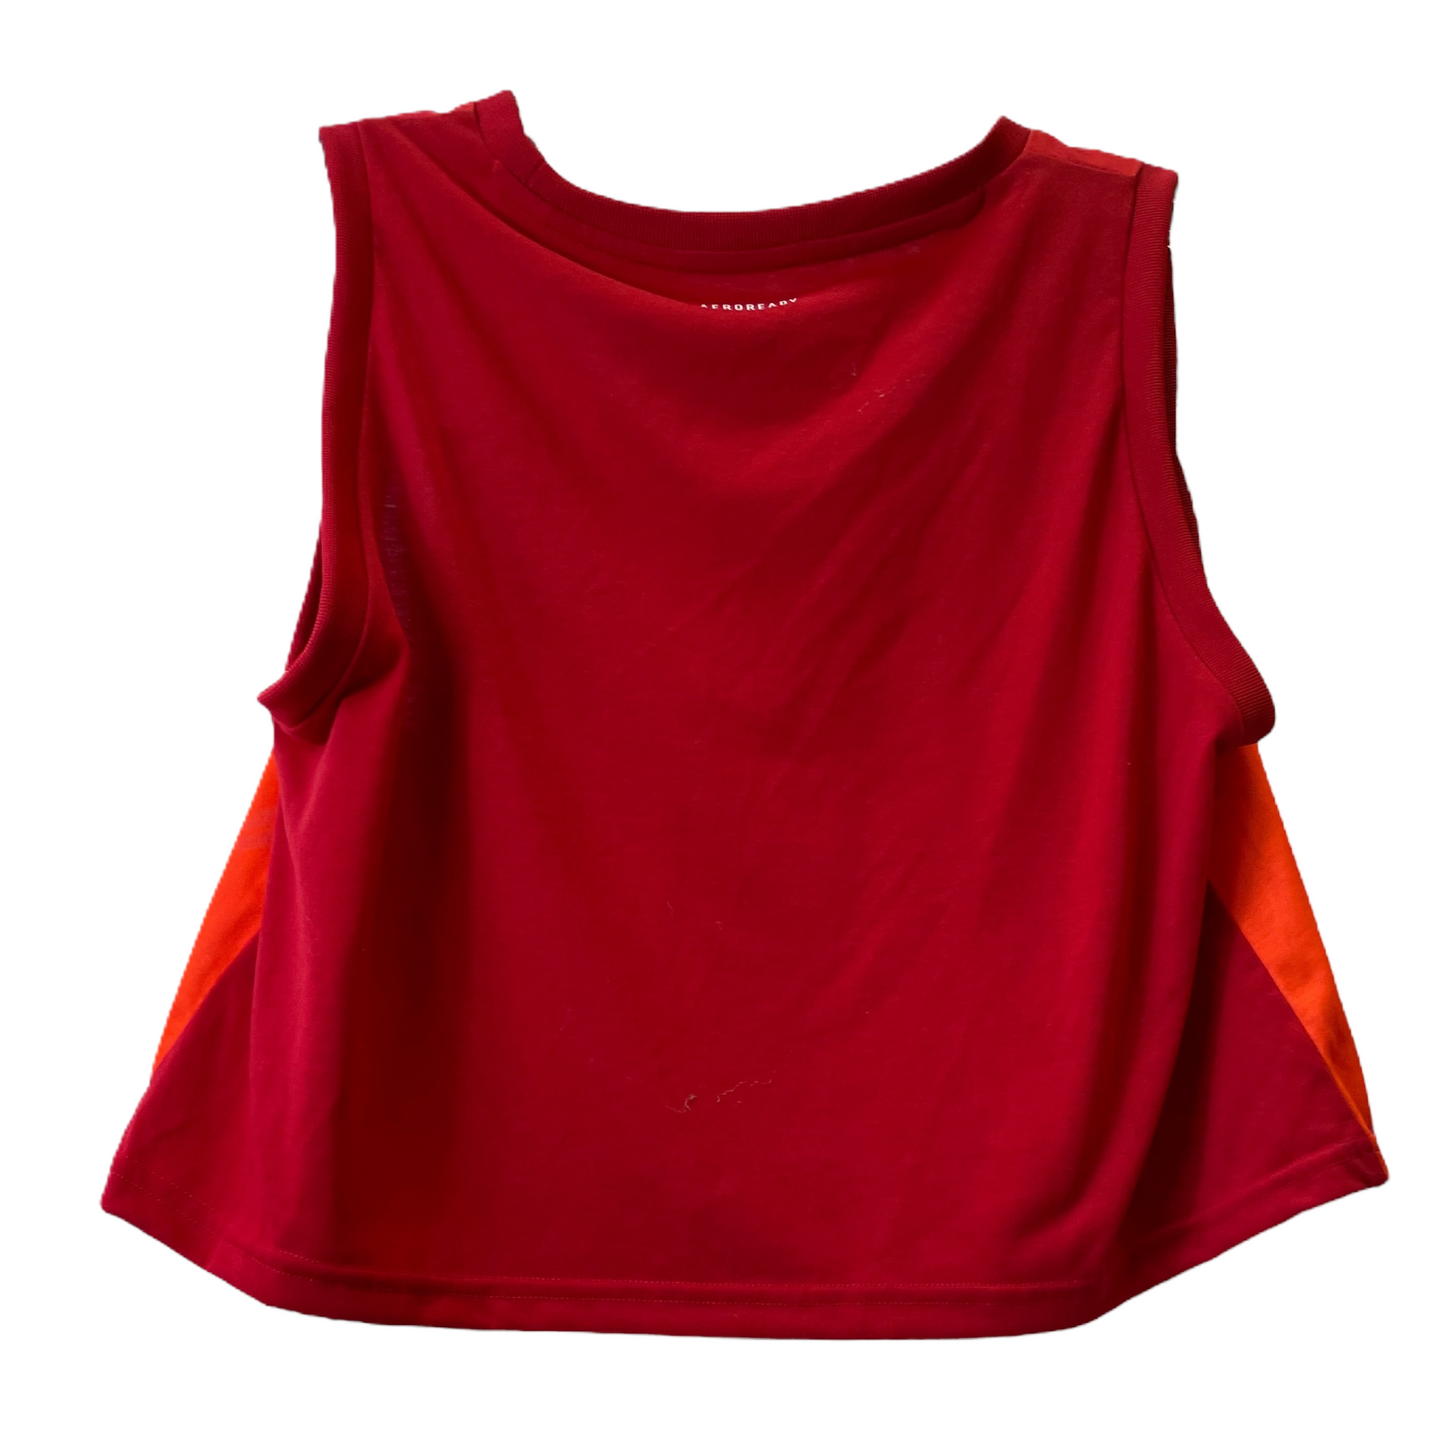 Red Athletic Tank Top By Adidas, Size: L